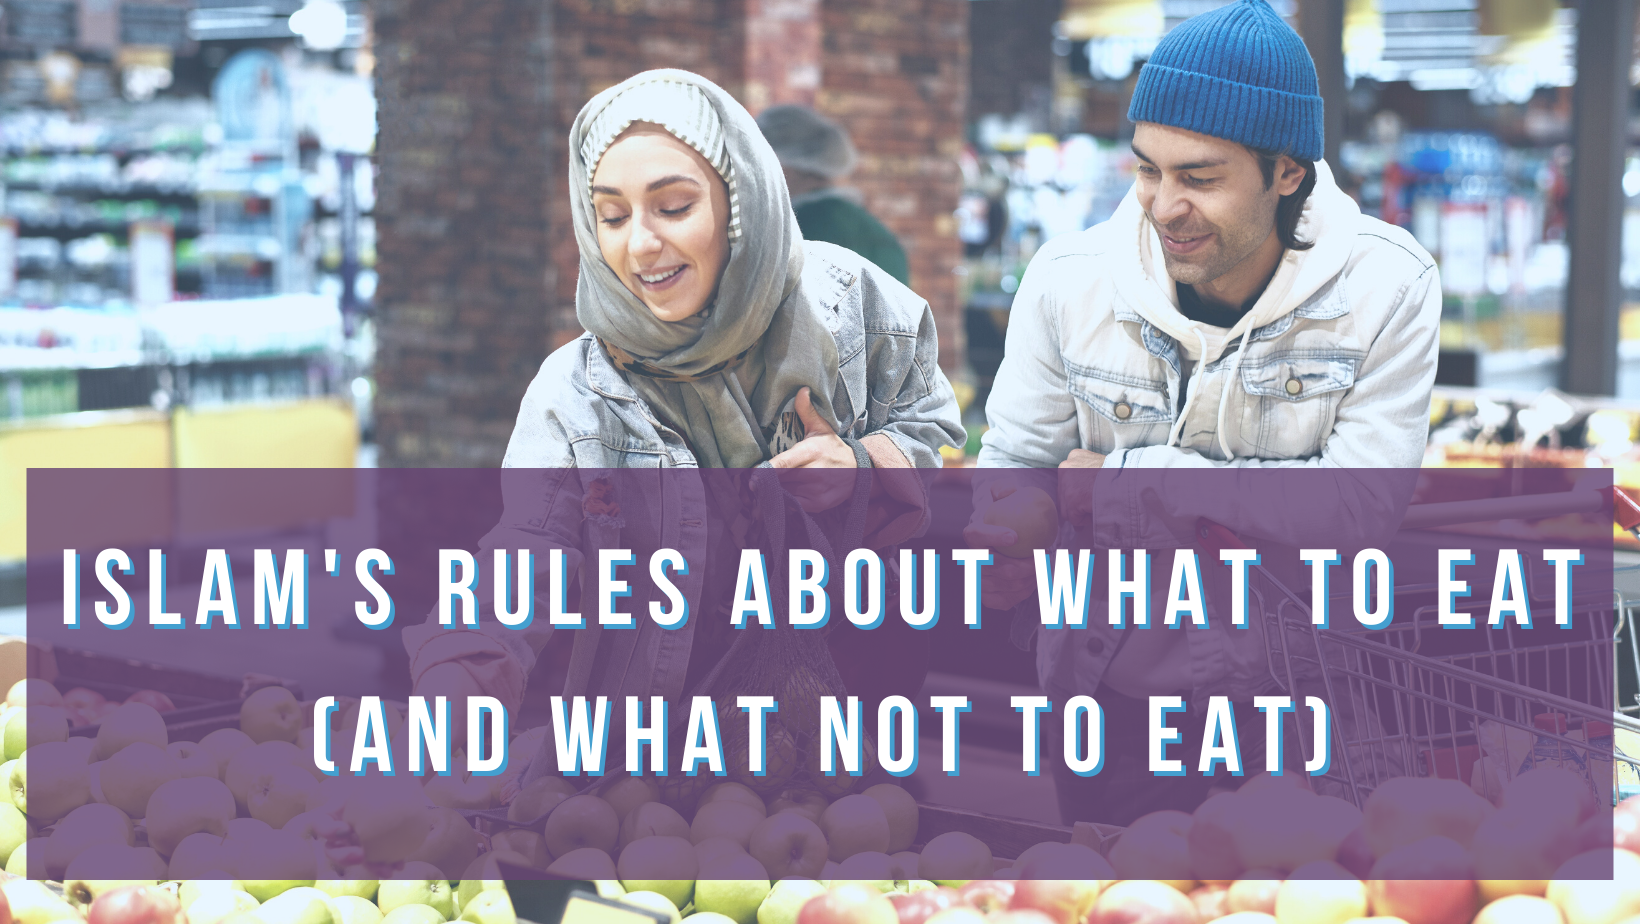 Islam's rules about what to eat (and what not to eat)